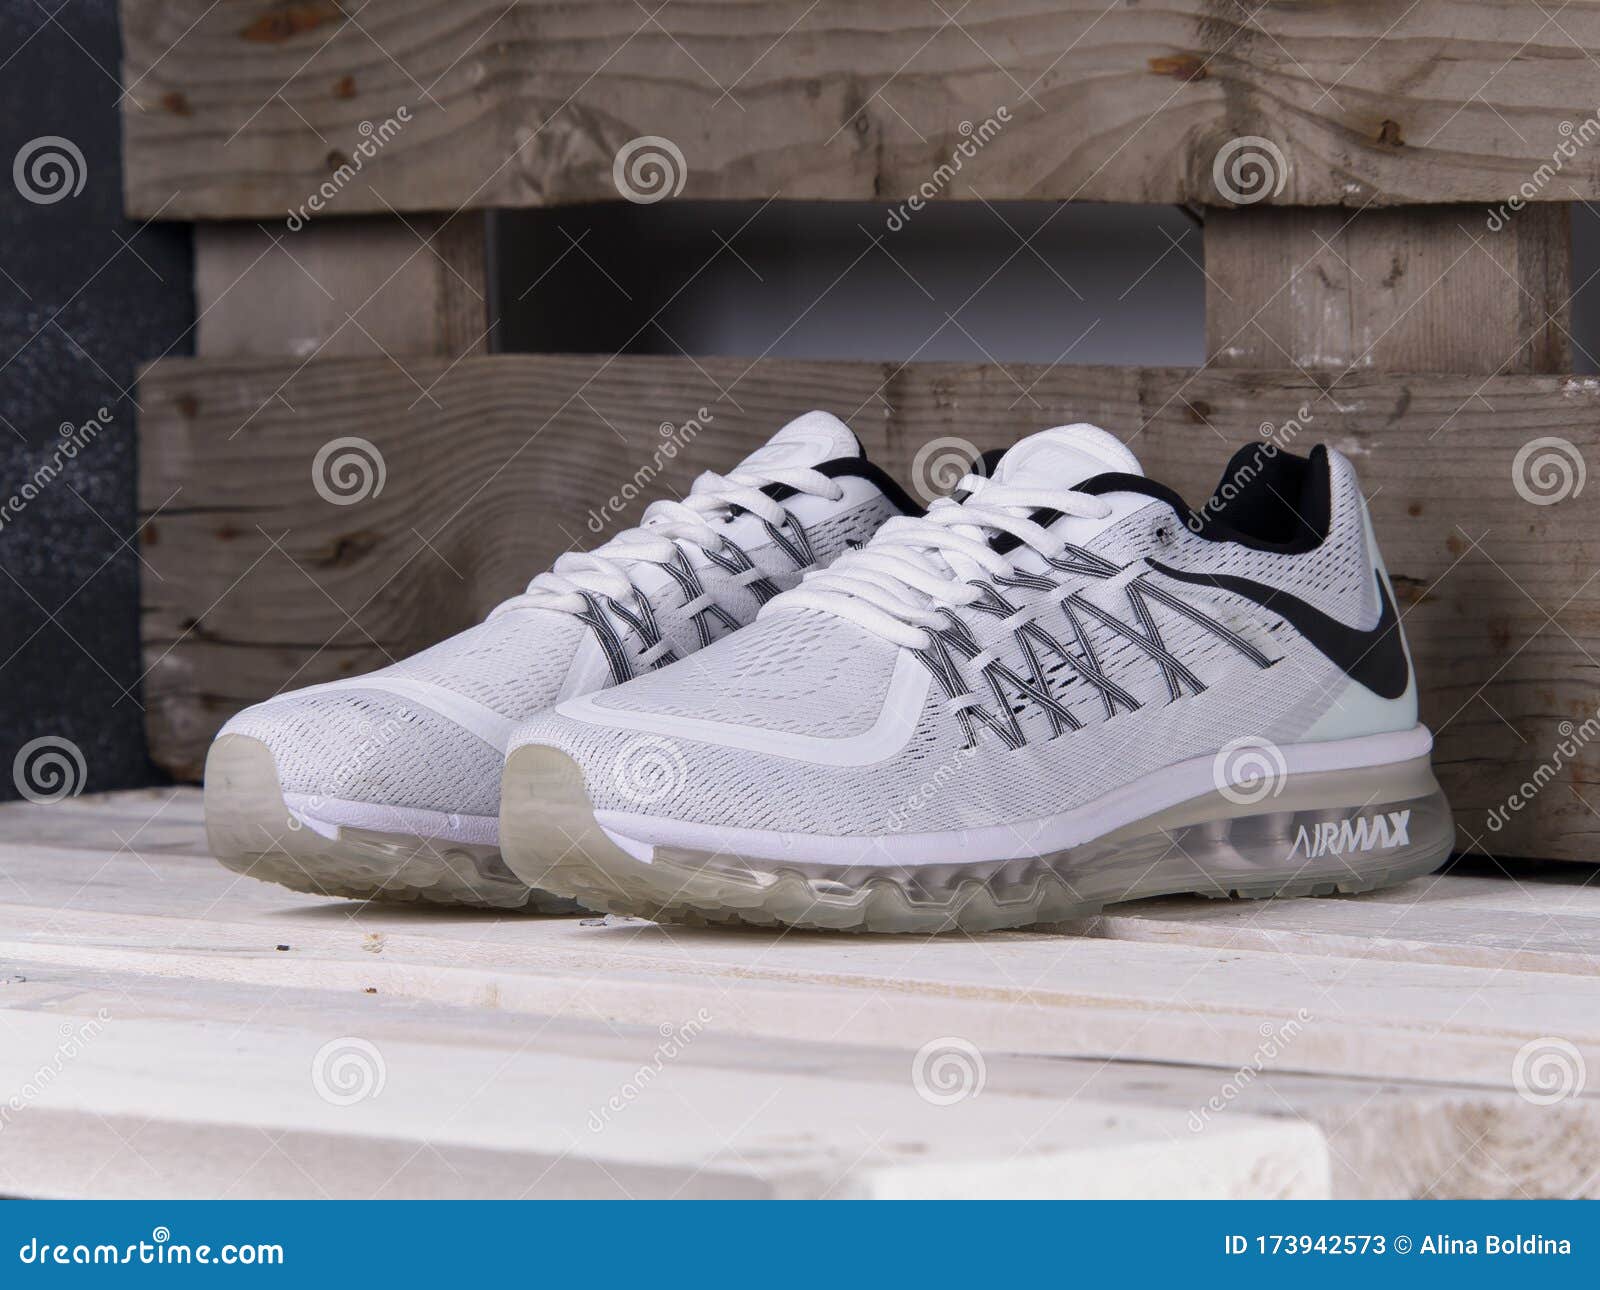 microfoon Kardinaal ras White Nike Air Max 2015 Sneakers, Running Shoes on Wooden Background.  Krasnoyarsk, Russia - July 10, 2017 Editorial Stock Photo - Image of  famous, leather: 173942573